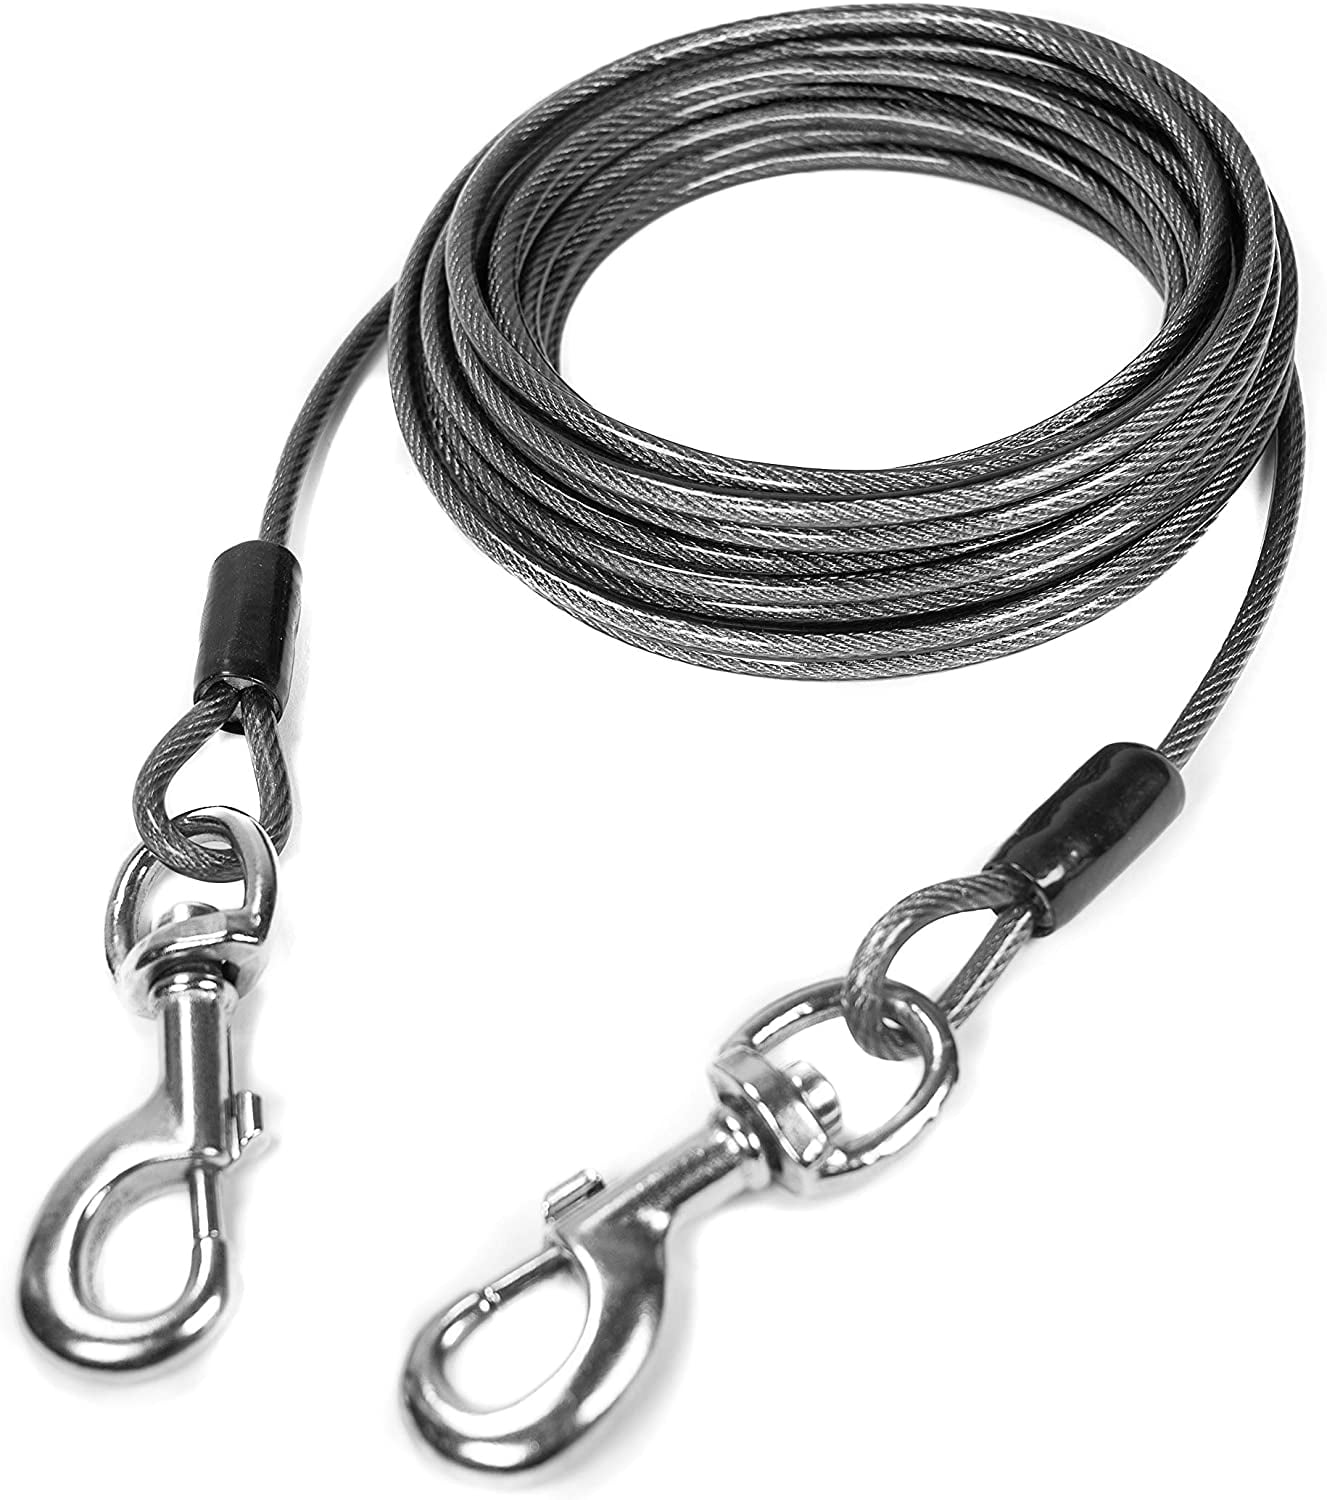 WATFOON Metal Dog Leash for Heavy Duty Dogs,Strong Chew Resistant Braided Steel Cable Designed for Aggressive Chewers 2.6/3.3/4.0/4.3/5.0/5.3/6.0ft 